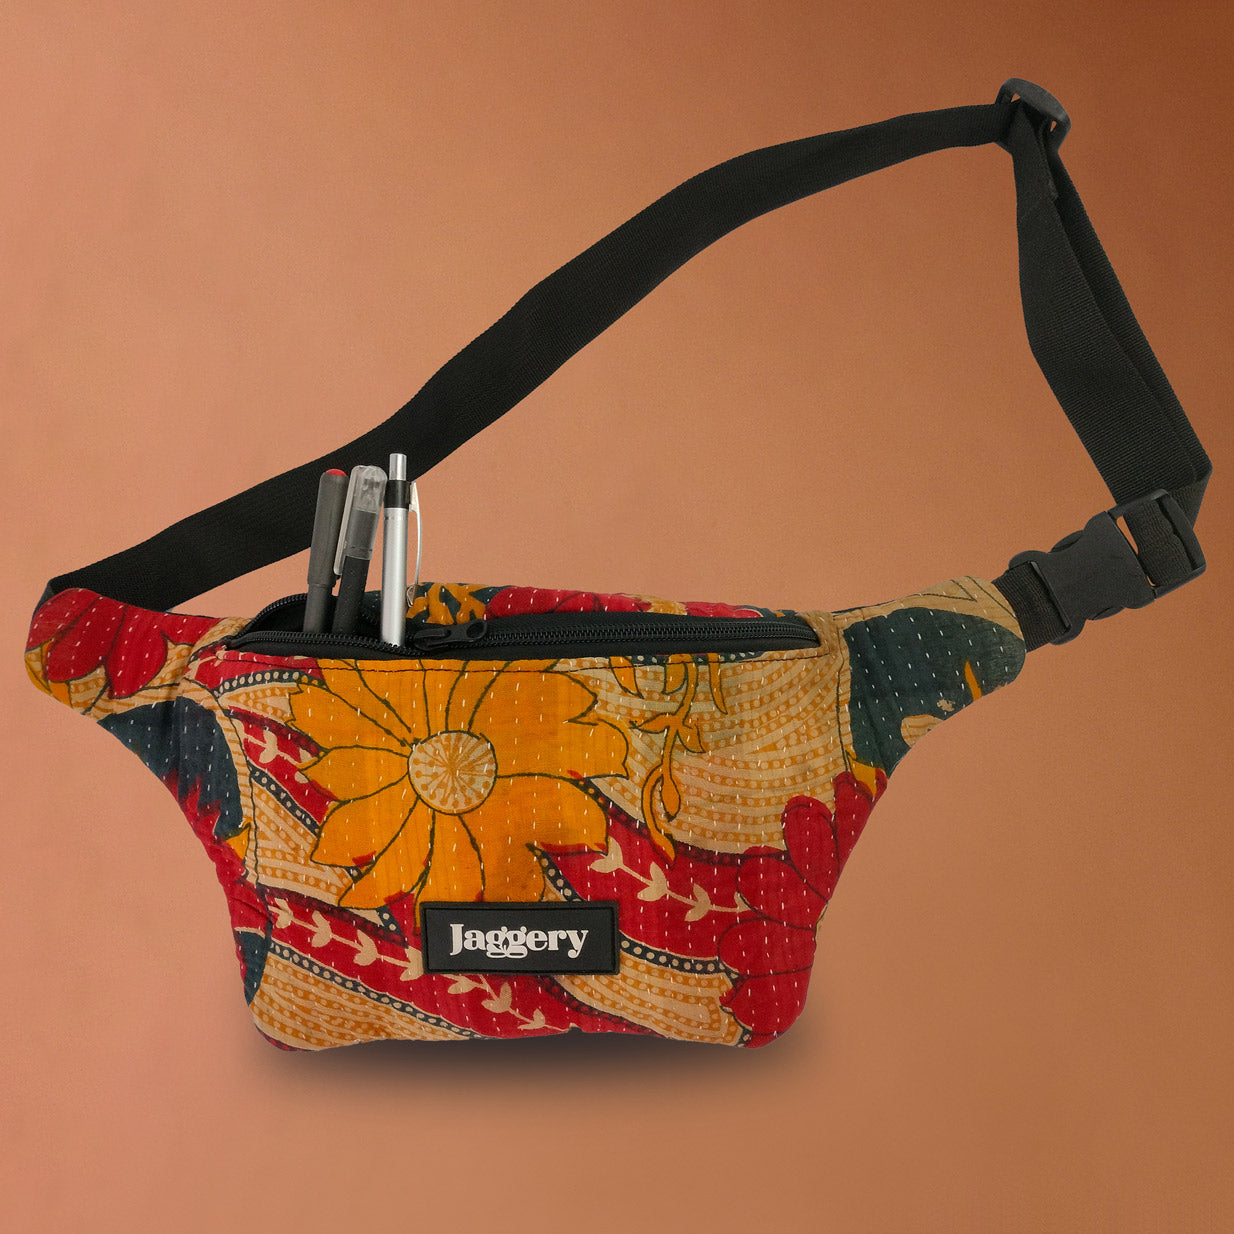 Punar Prayog Cross Body Bag in Kantha, Ex-Army Canvas and Rescued Car Seat Belts